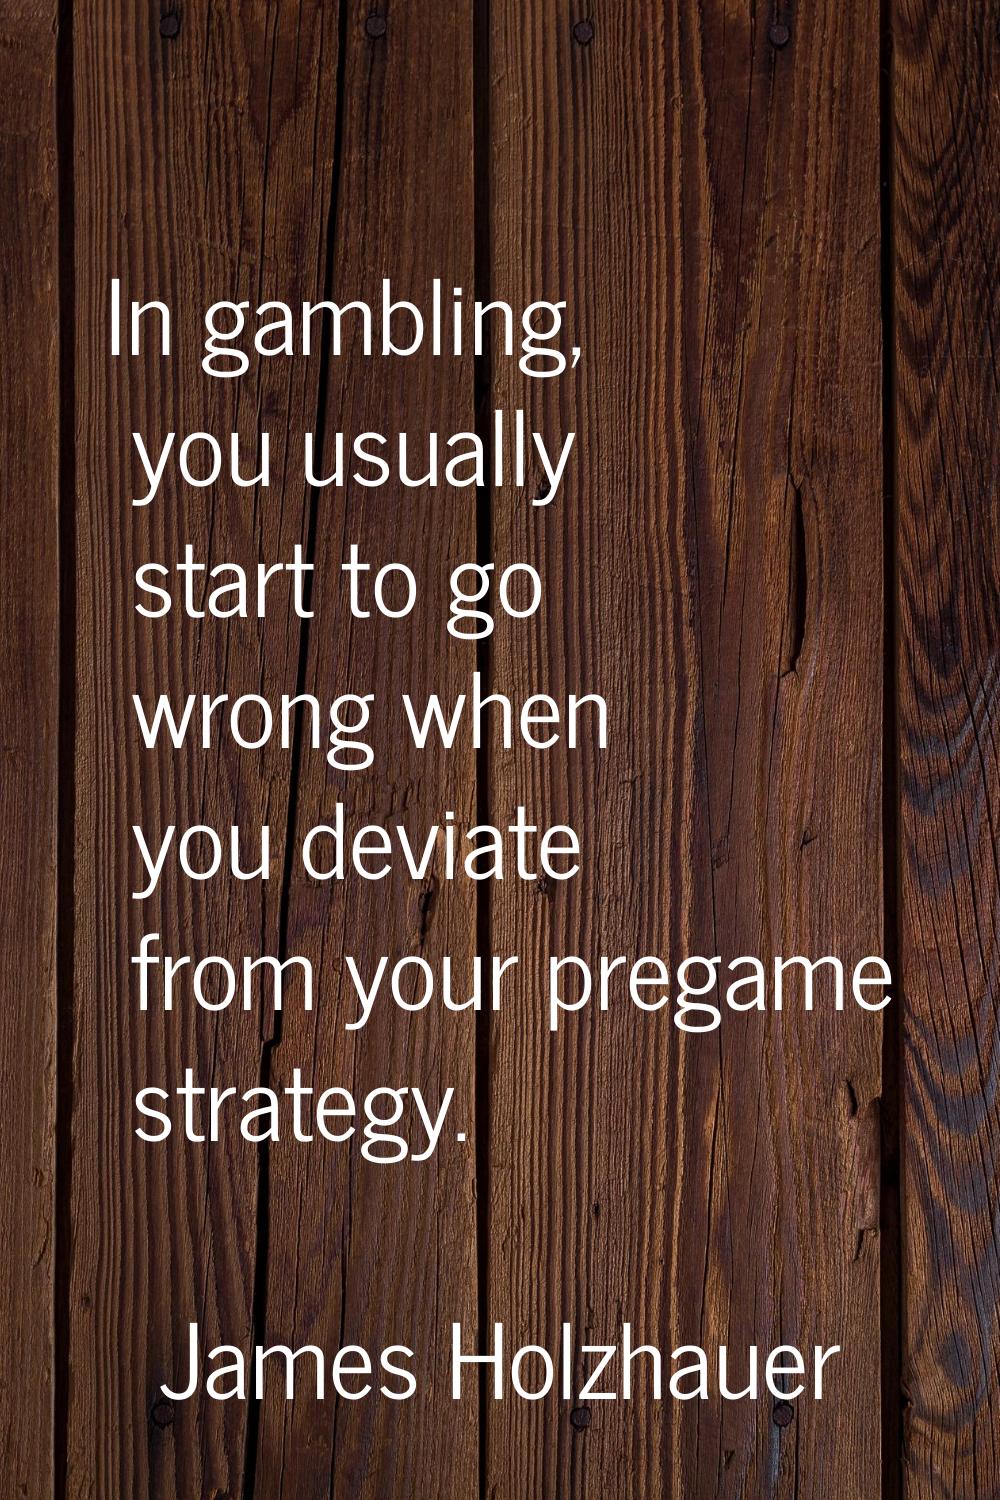 In gambling, you usually start to go wrong when you deviate from your pregame strategy.